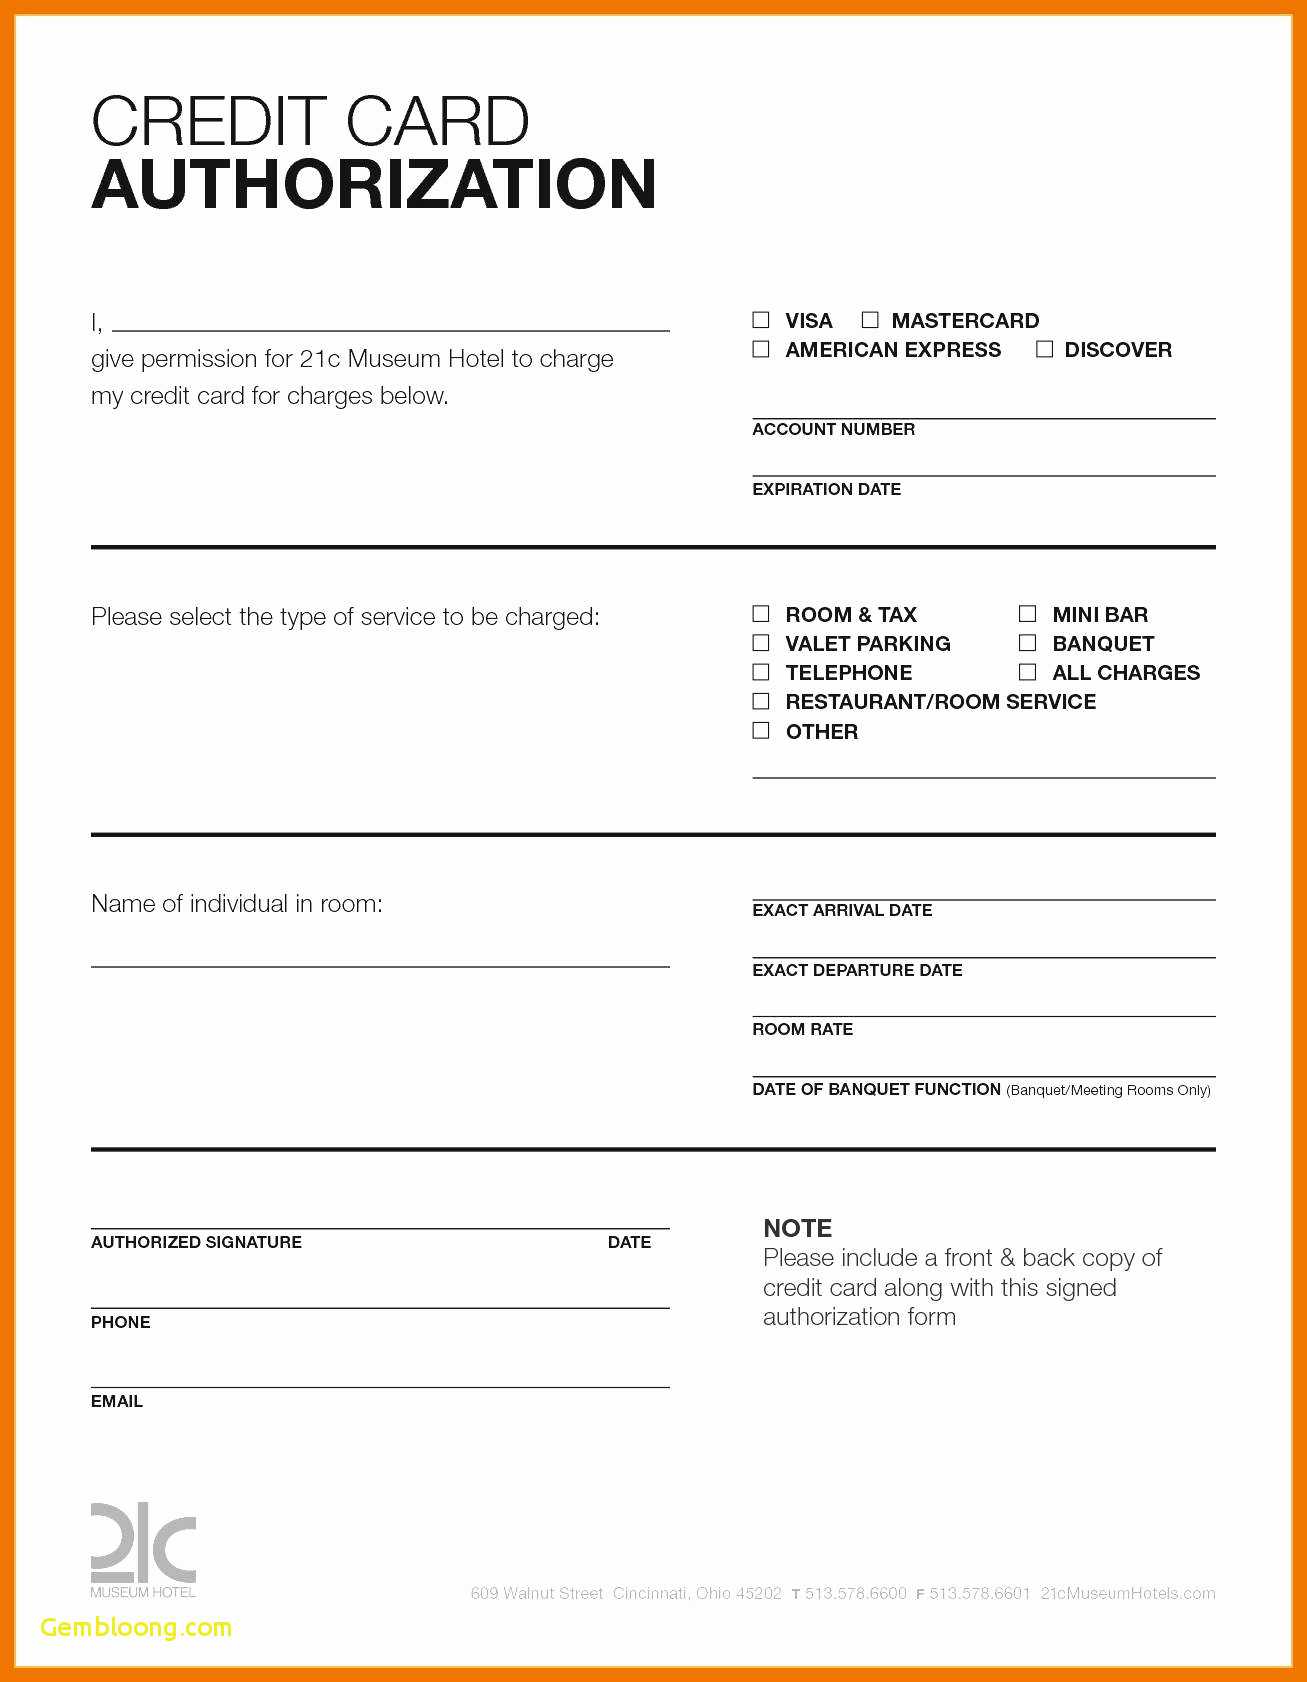 004 Canadian Credit Card Authorization Form Template Ideas Throughout Credit Card Authorization Form Template Word